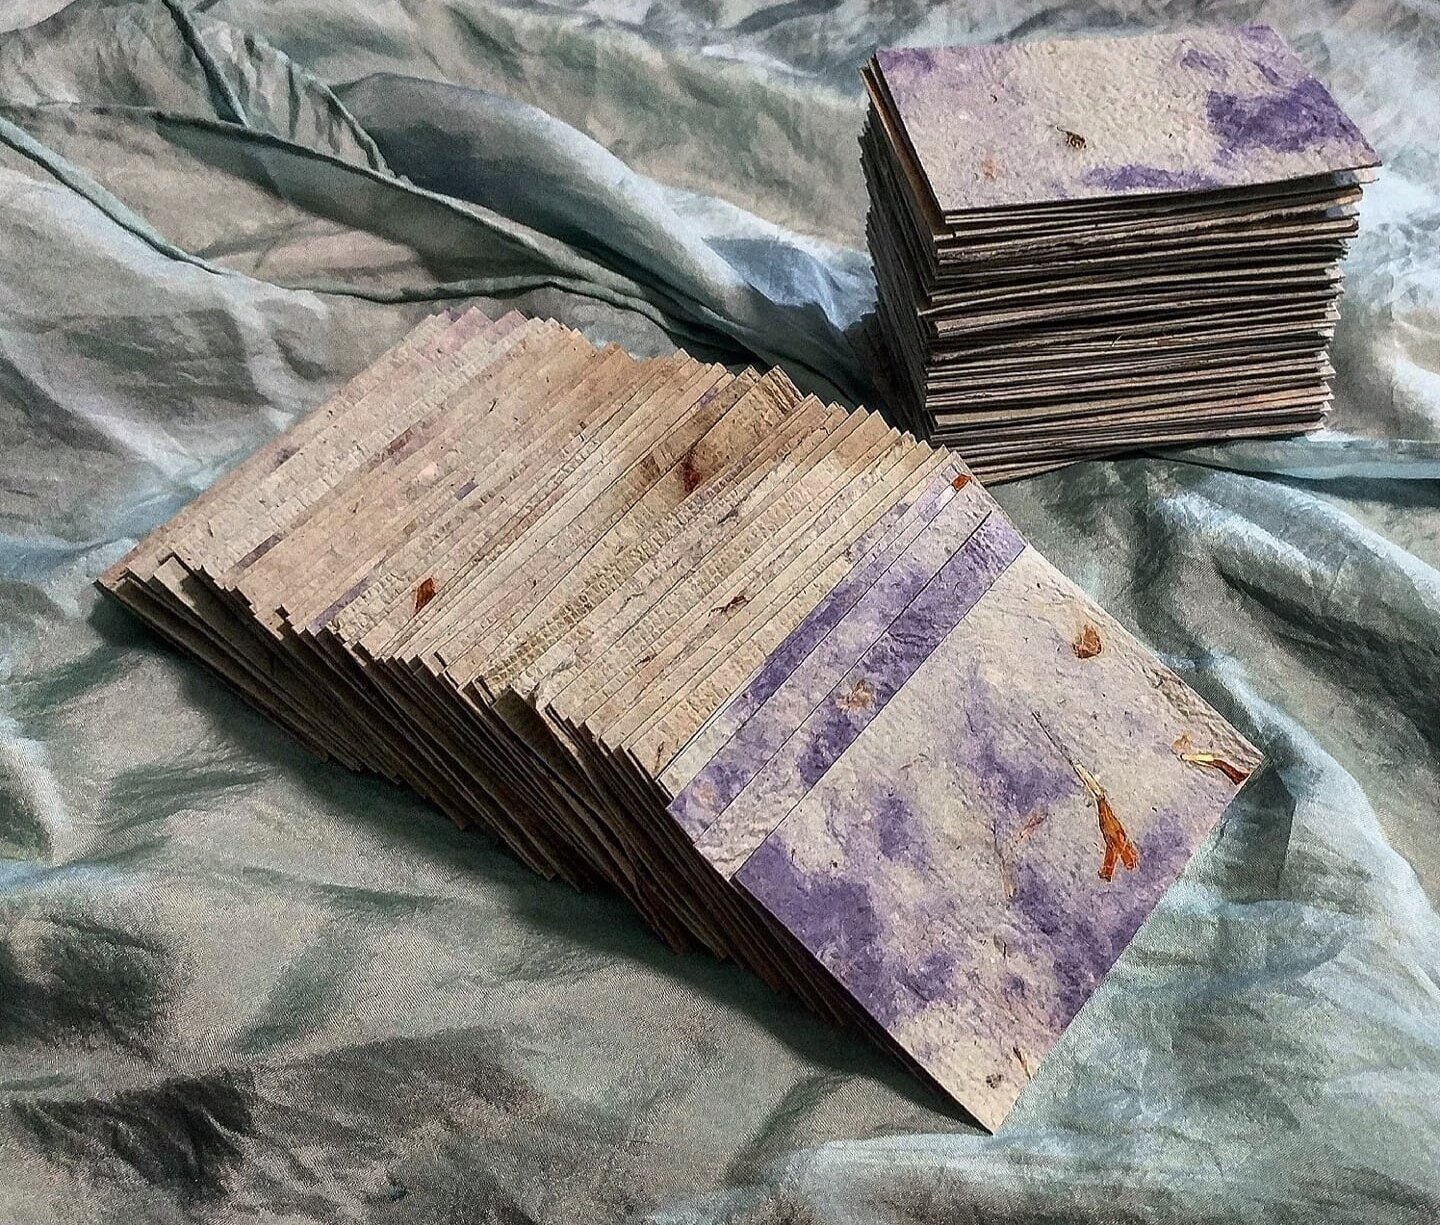  108 swatches of a one of a kind special blend of handmade paper (cotton, abaca, kozo, gampi, iris, hosta, flax, daylily, dracaena, cordyline, yucca, butterfly bush, rose of sharon, reed feather grass, porcupine grass, ribbon grass, cattail, cattail 